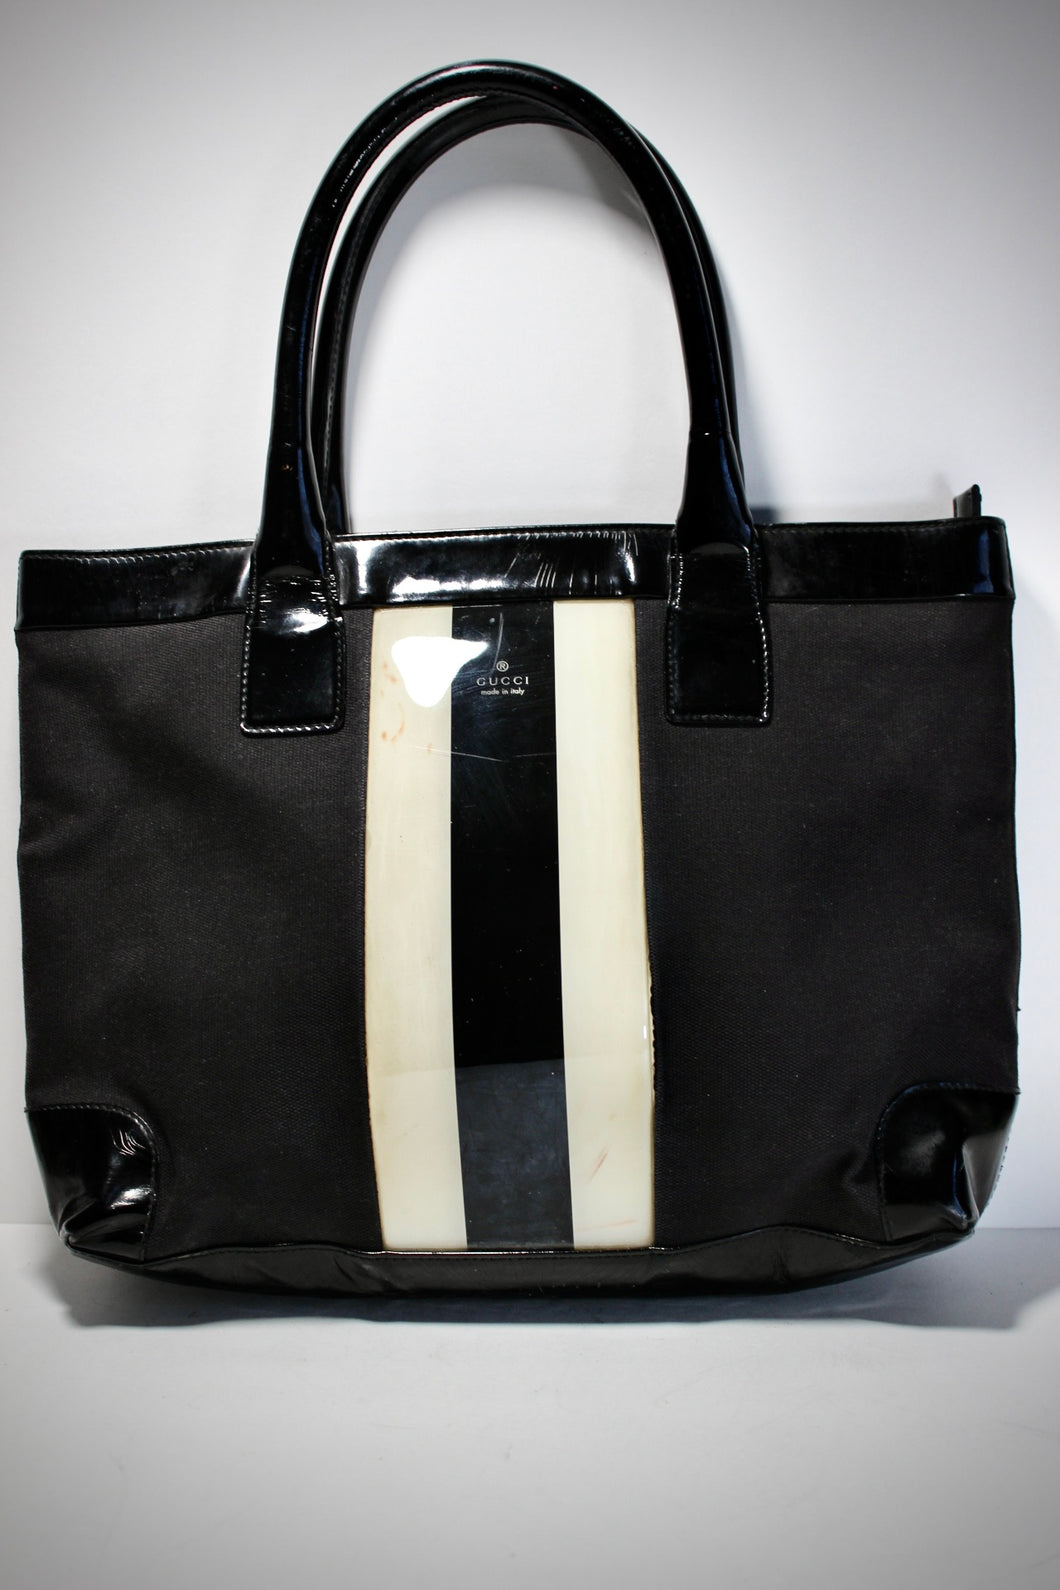 GUCCI Vintage Canvas Patent Leather White/Black Stripe Tote Bag Double Handle Italy